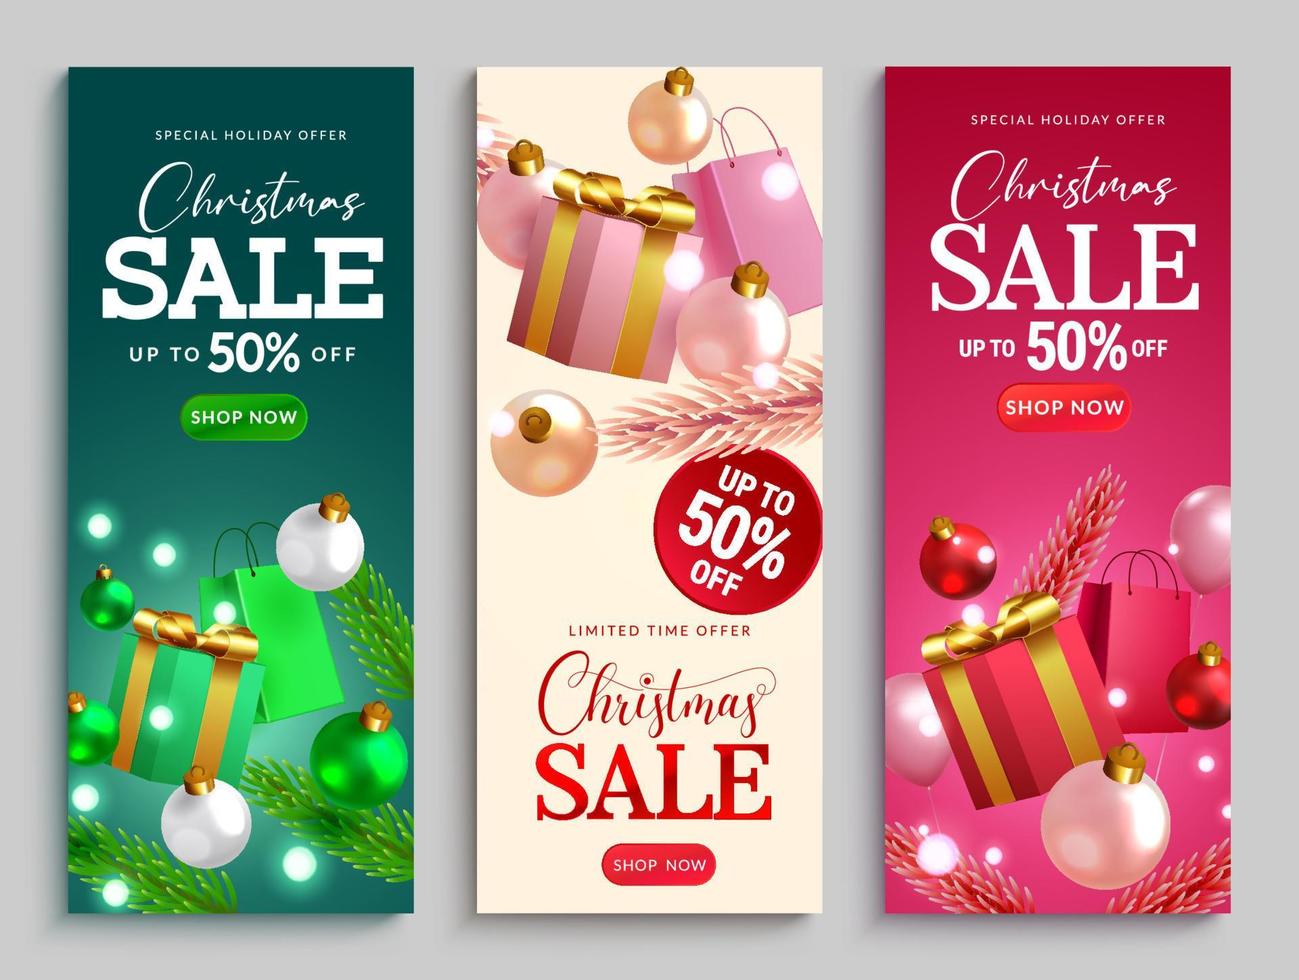 Christmas sale vector poster set. Christmas sale holiday offer text promo for xmas gifts shopping discount and clearance promotion. Vector illustration.